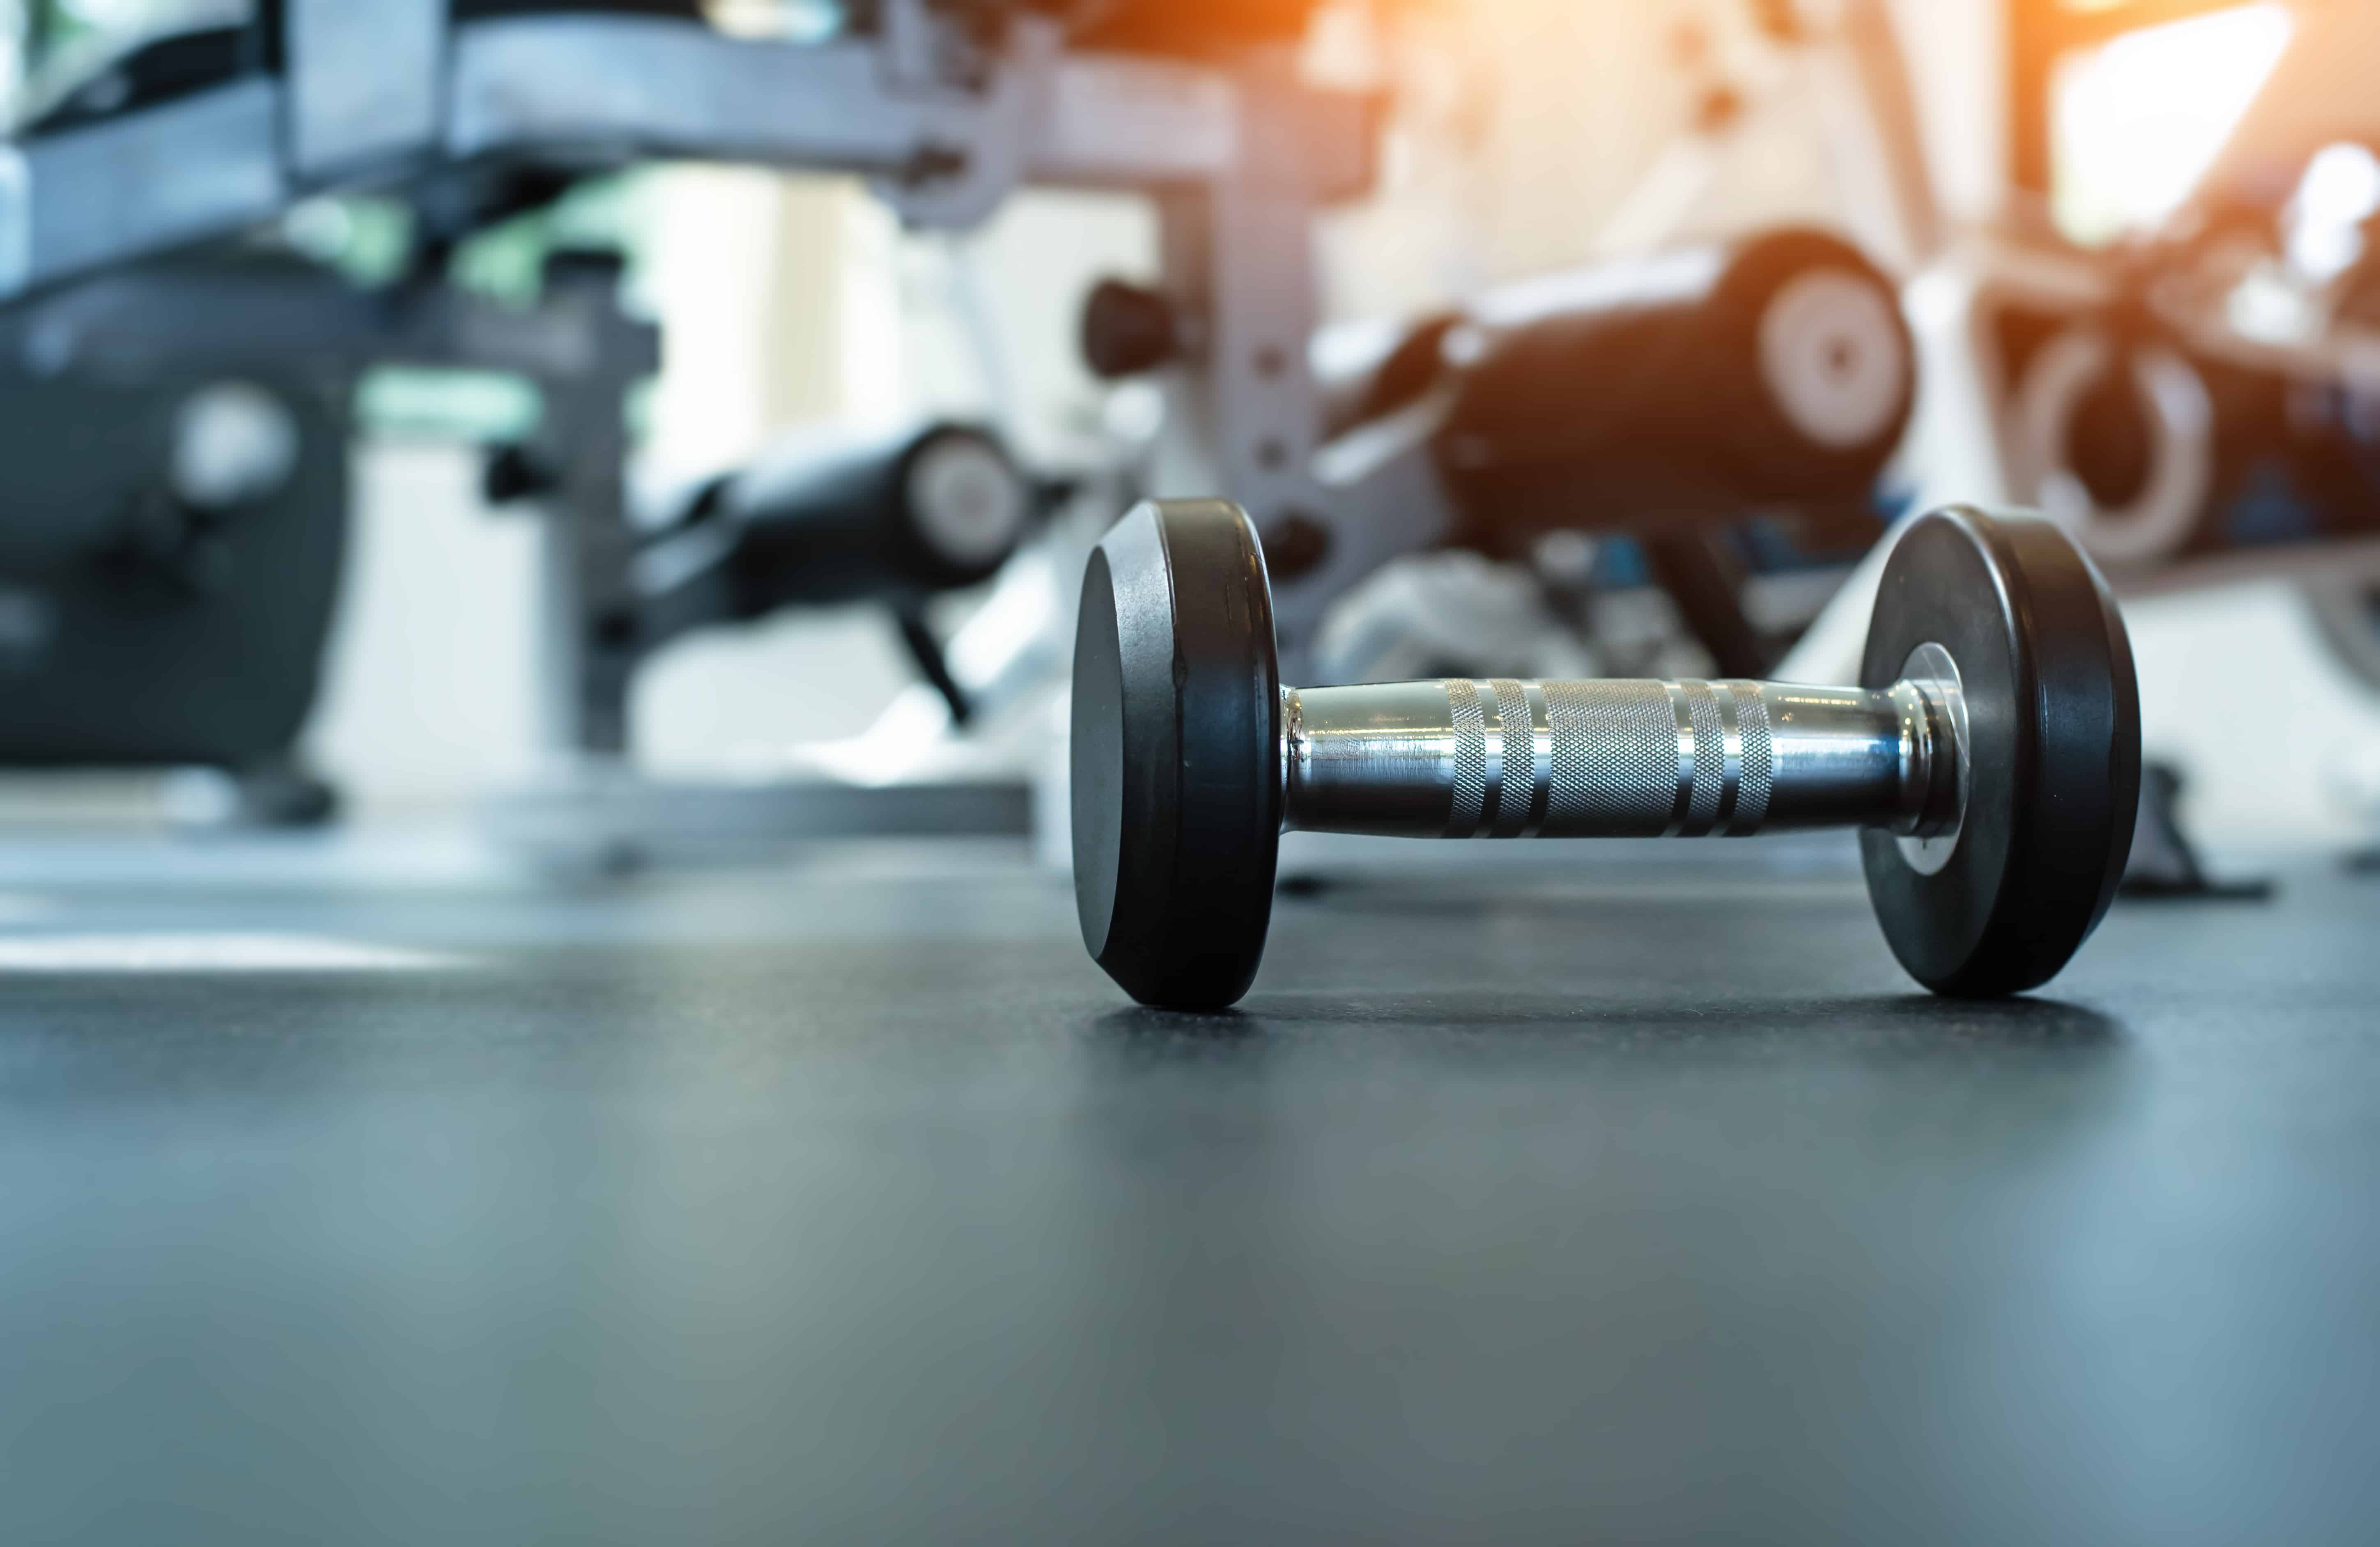 The dumbbell put on ground floor,at fitness room,warm light tone,blurry light around